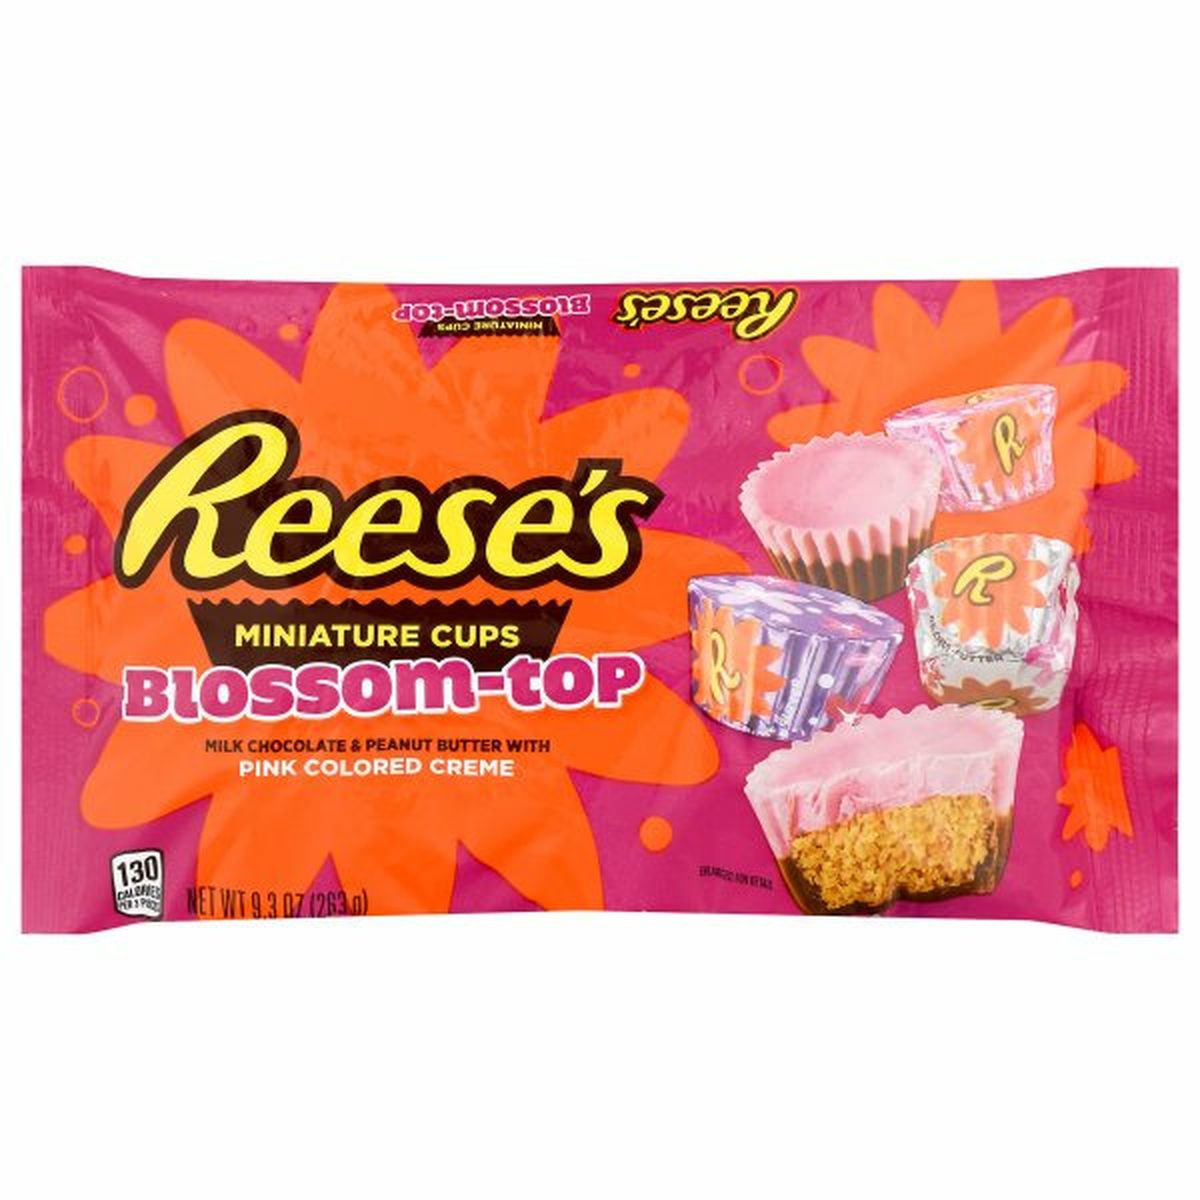 Calories in Reese's Milk Chocolate & Peanut Butter, with Pink Colored Creme, Blossom-Top, Miniature Cups